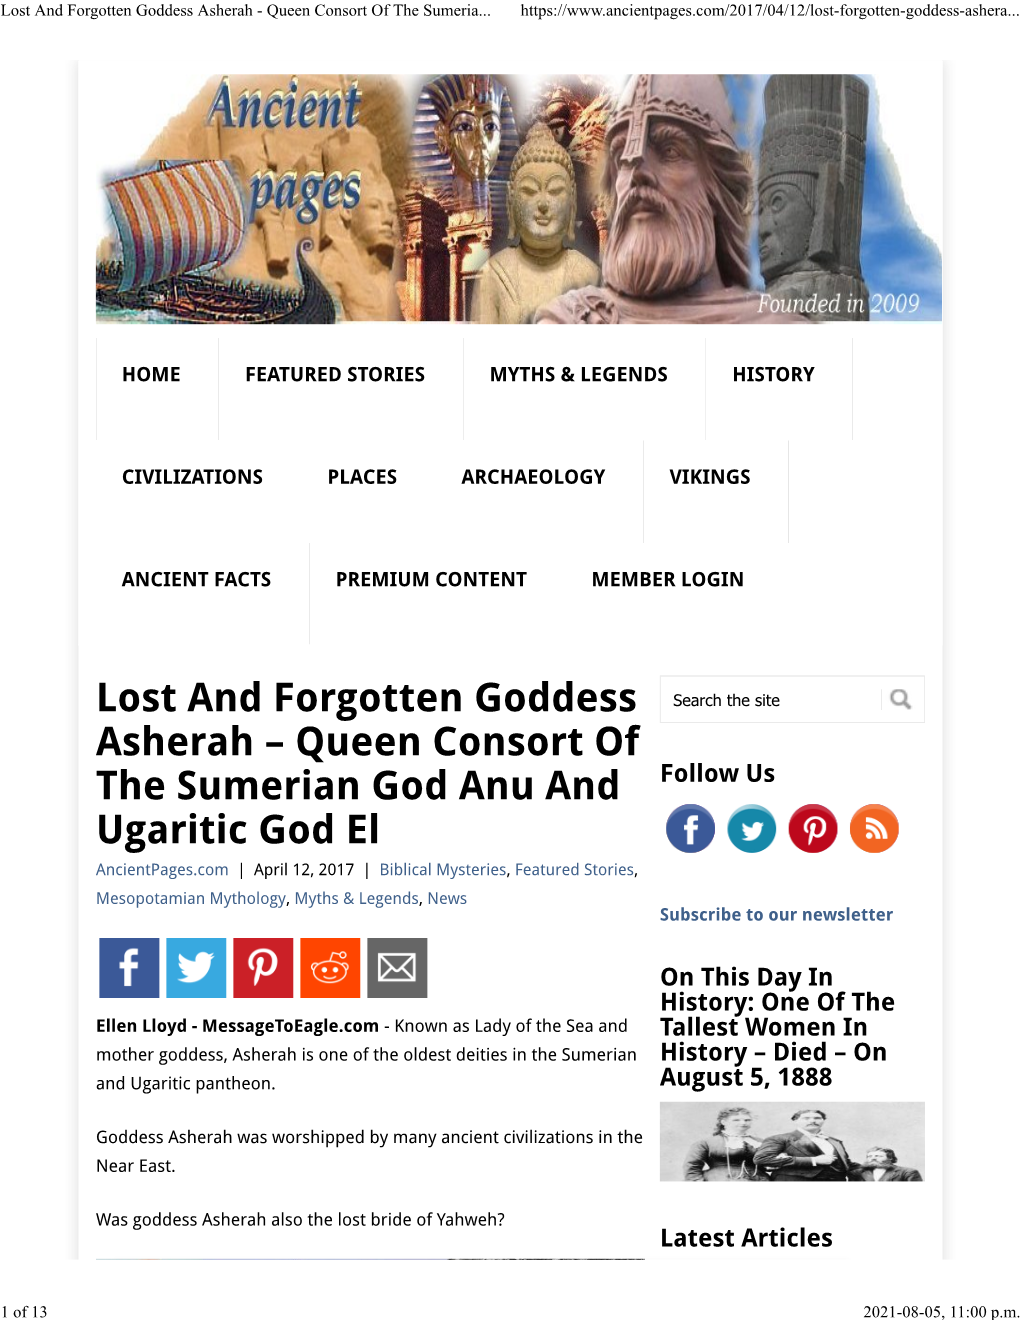 Lost and Forgotten Goddess Asherah – Queen Consort of the Sumerian